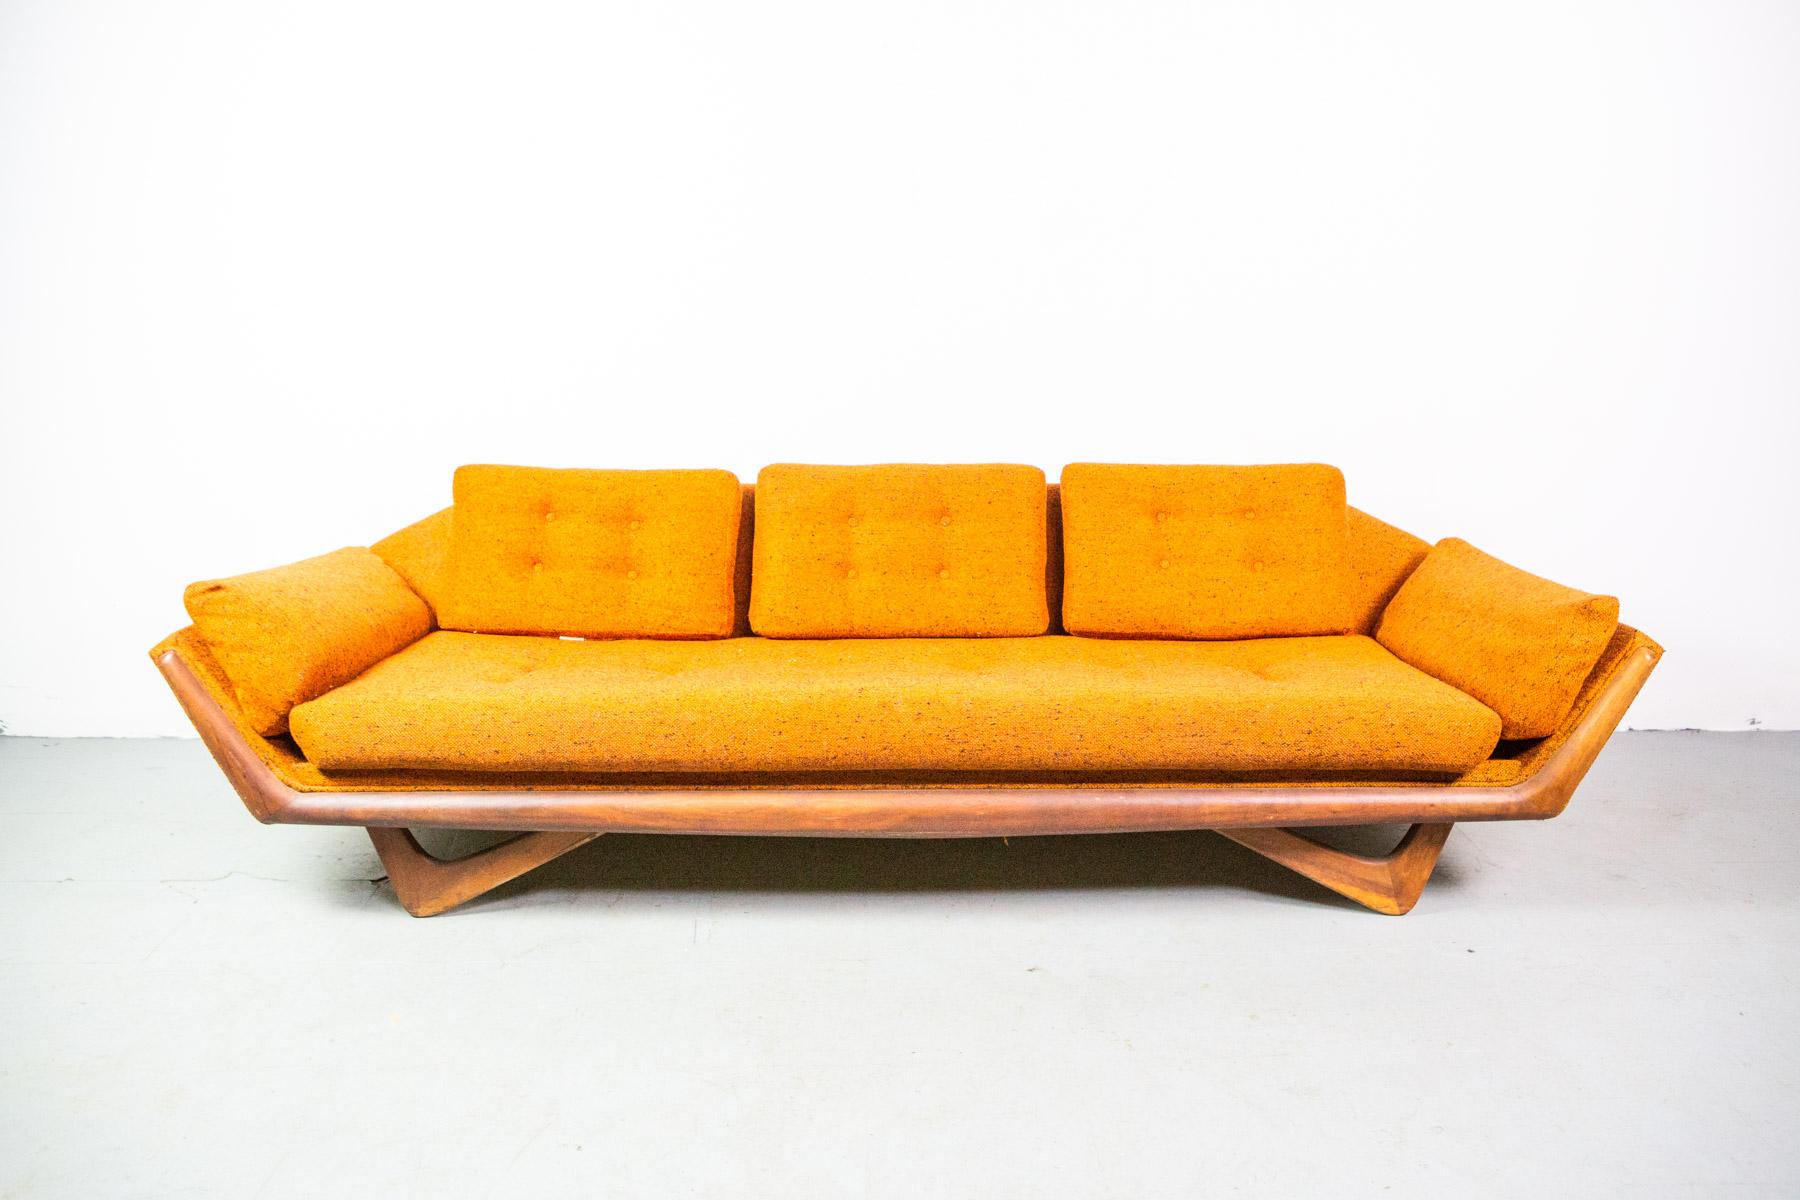 This beautiful vintage modern sofa features the innovative design of midcentury great Adrian Pearsall. Sculpted wood legs and frame paired with vintage fabric and cutaway seat back all add to the appeal of this uniquely shaped 